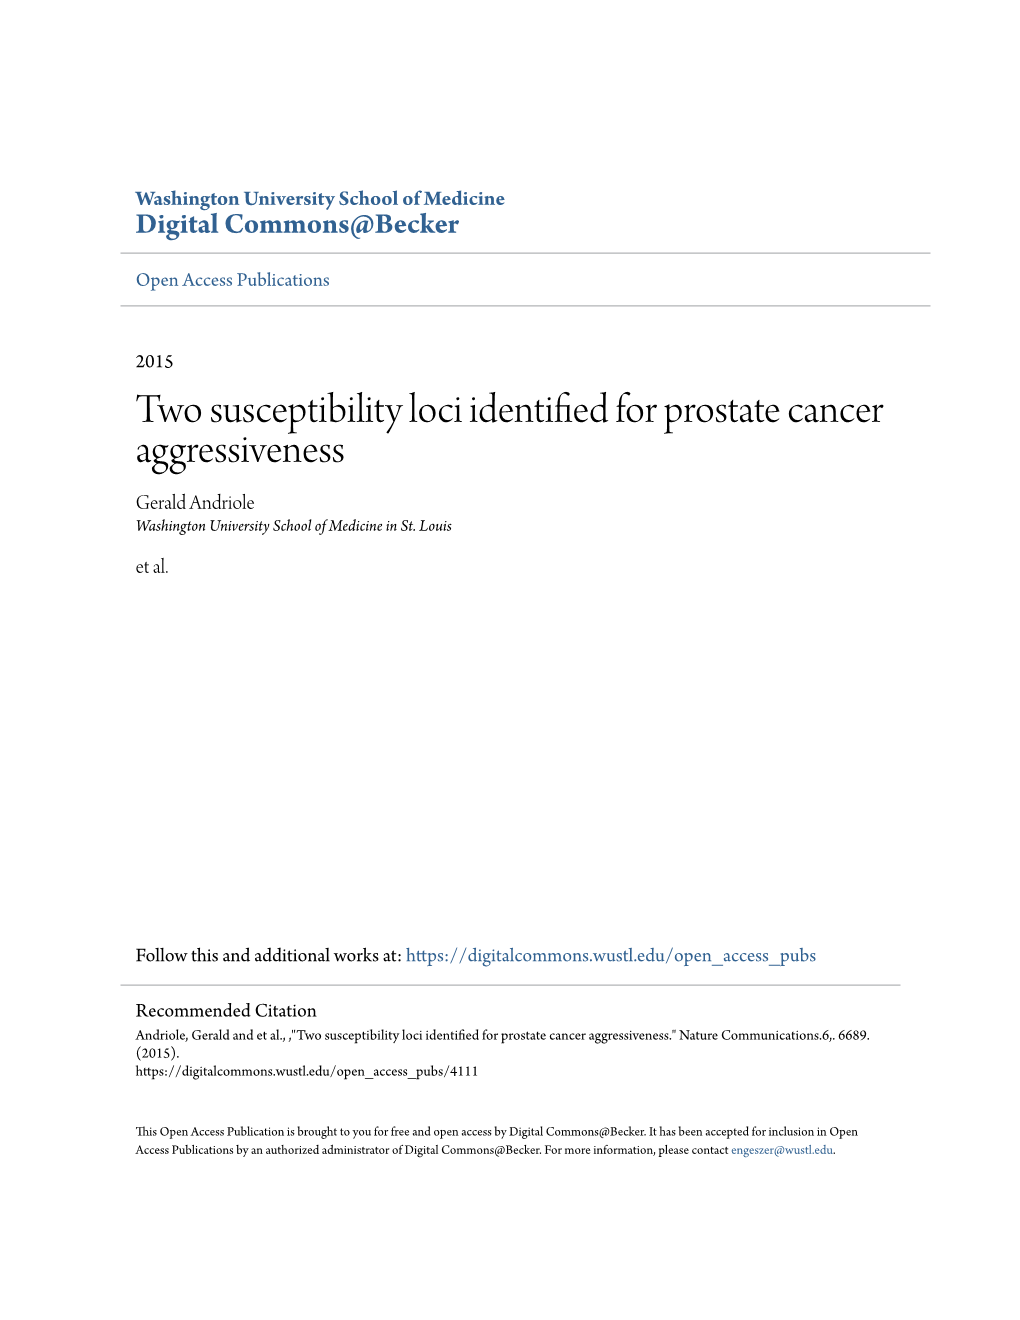 Two Susceptibility Loci Identified for Prostate Cancer Aggressiveness Gerald Andriole Washington University School of Medicine in St